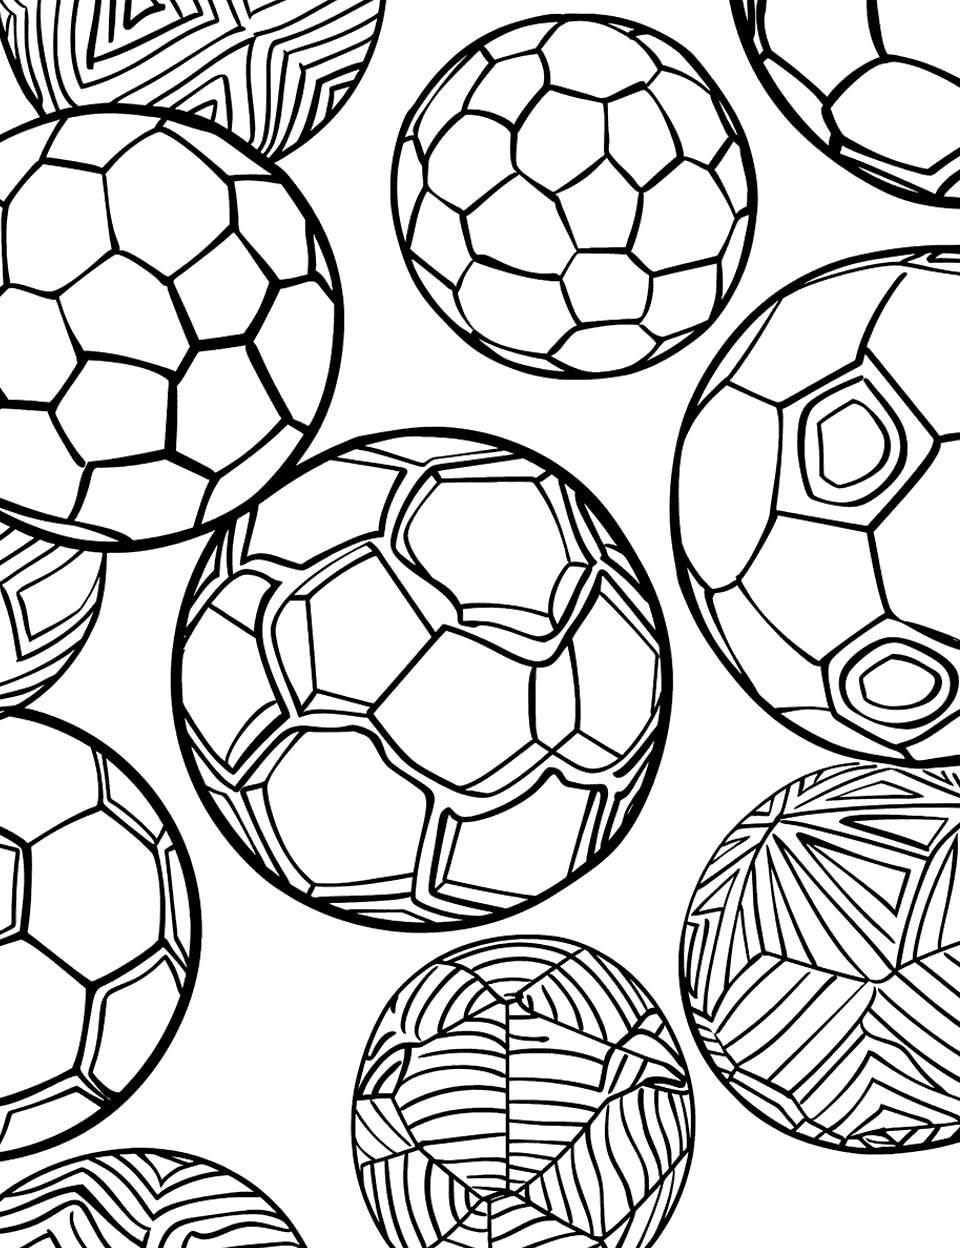 Soccer Ball Pattern Coloring Page - A page with overlapping soccer balls with different patterns.